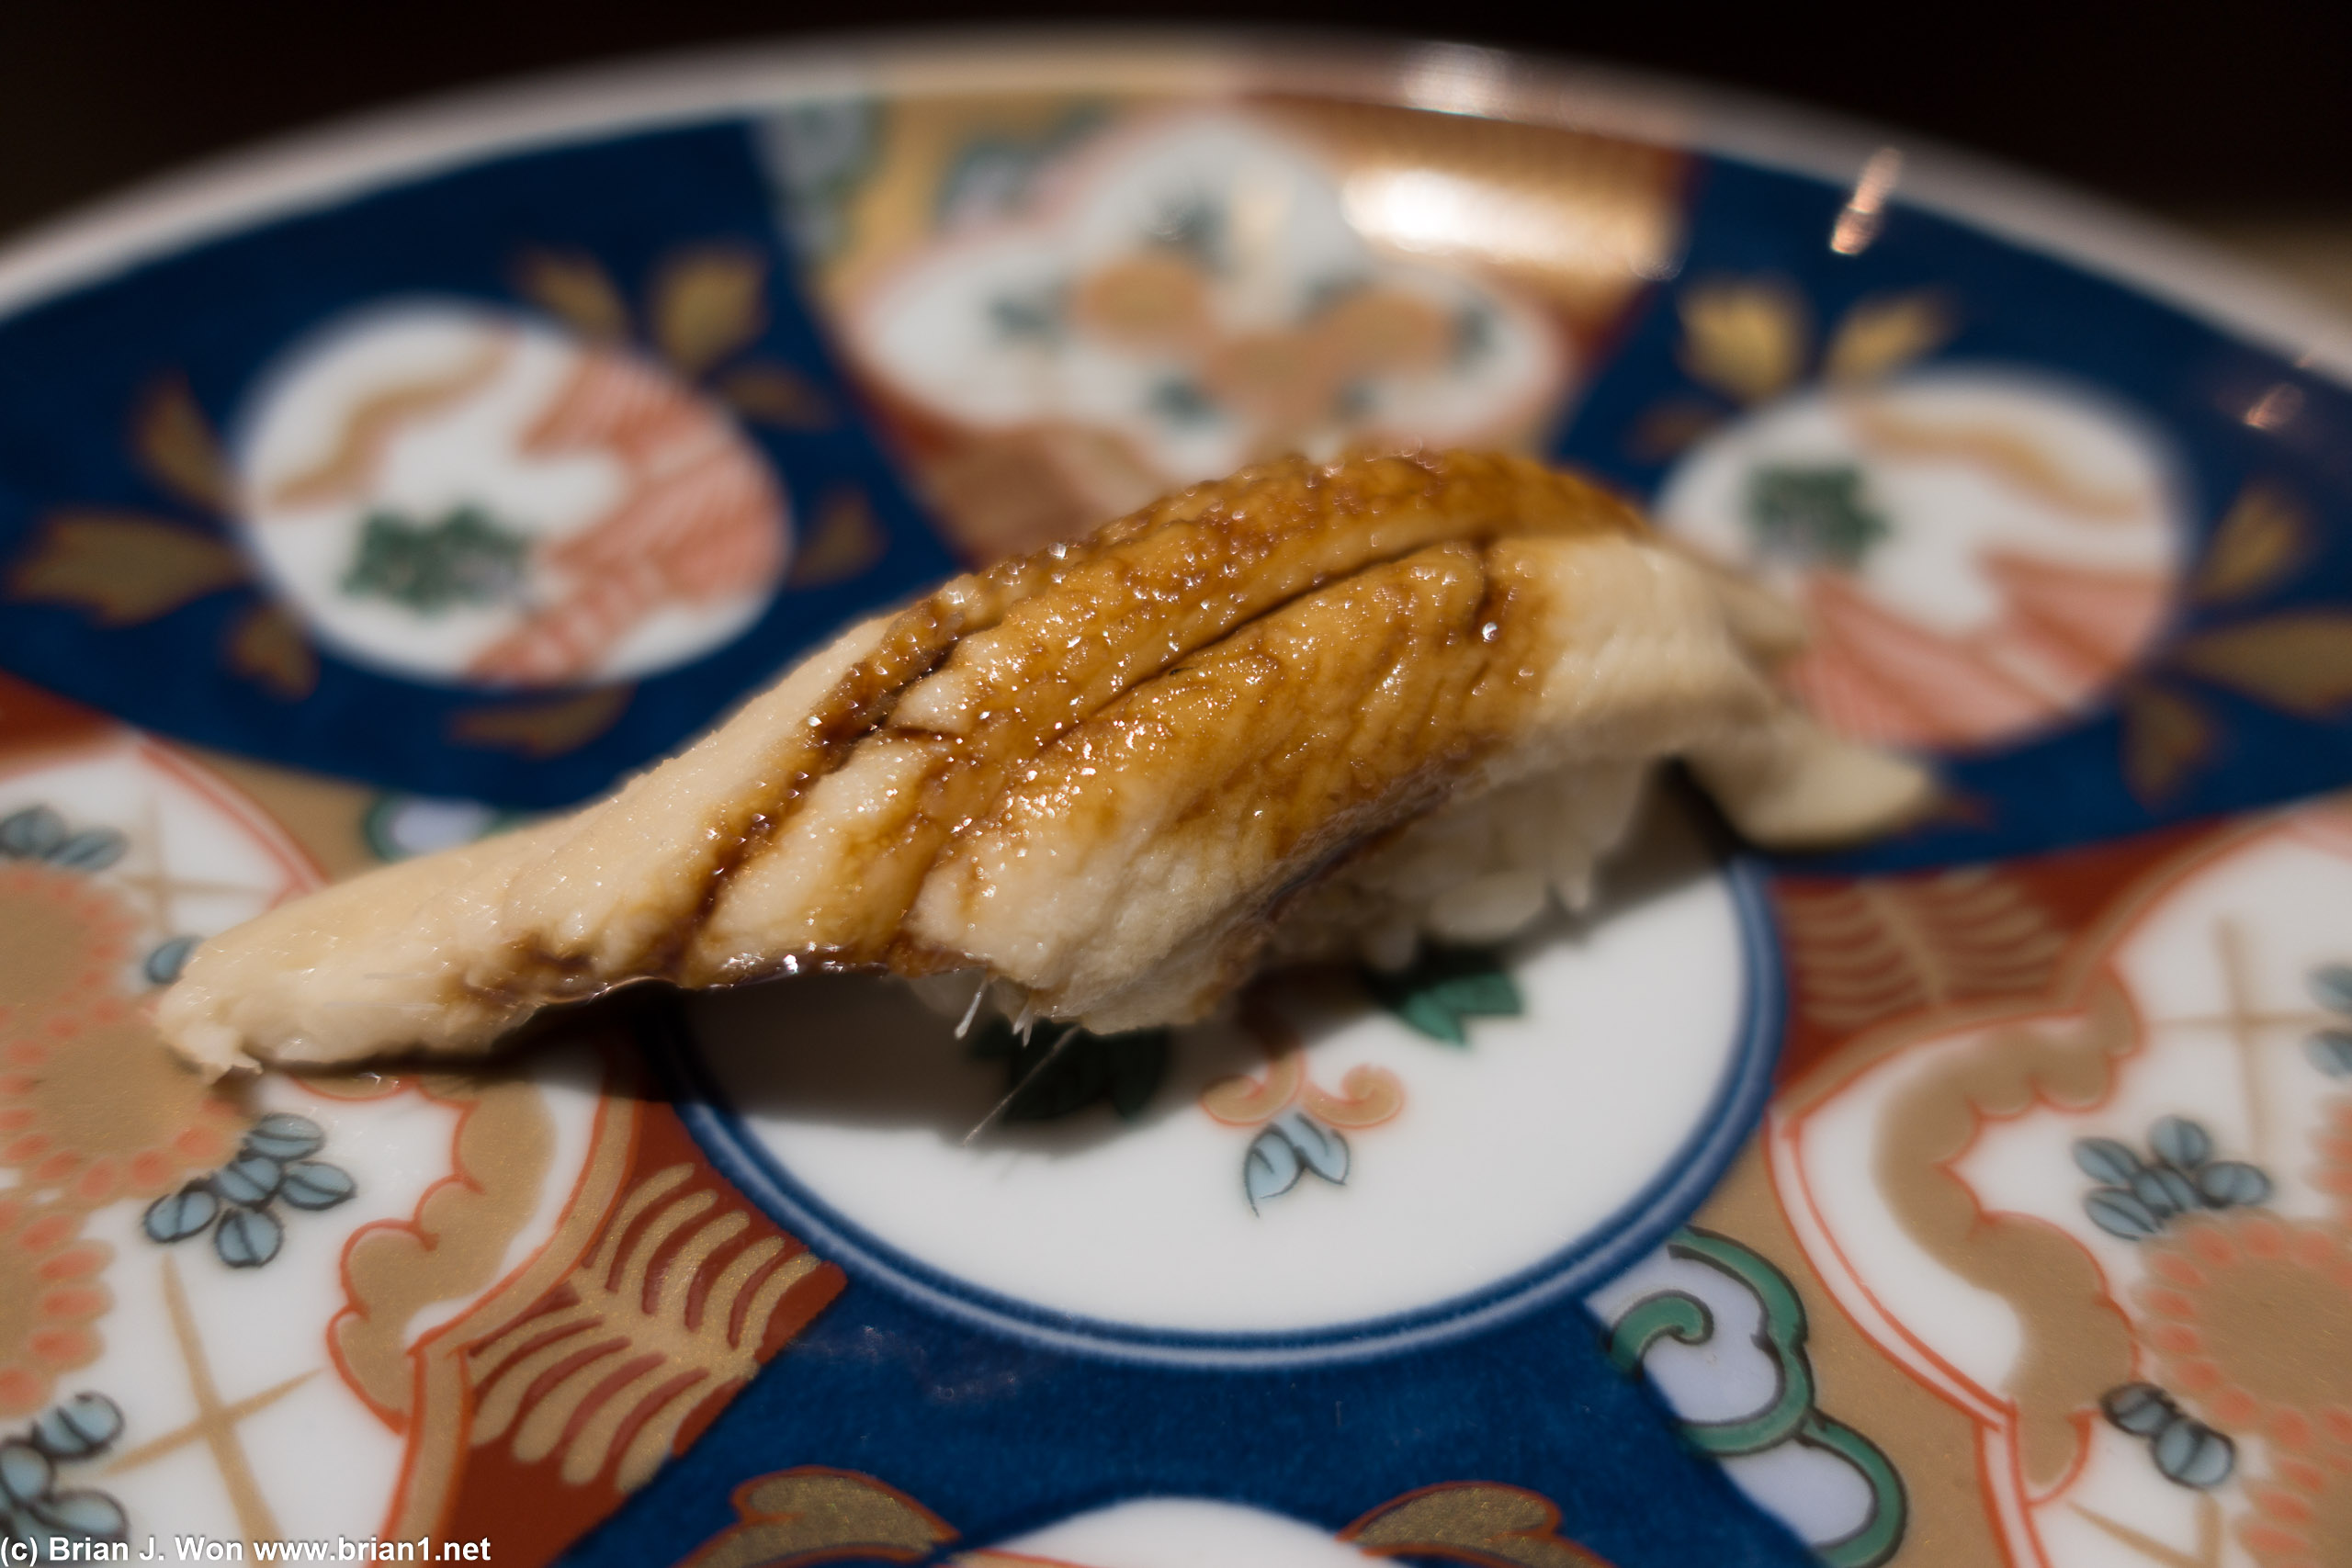 Anago (sea eel). Softer texture and flavor than the usaul freshwater eel.